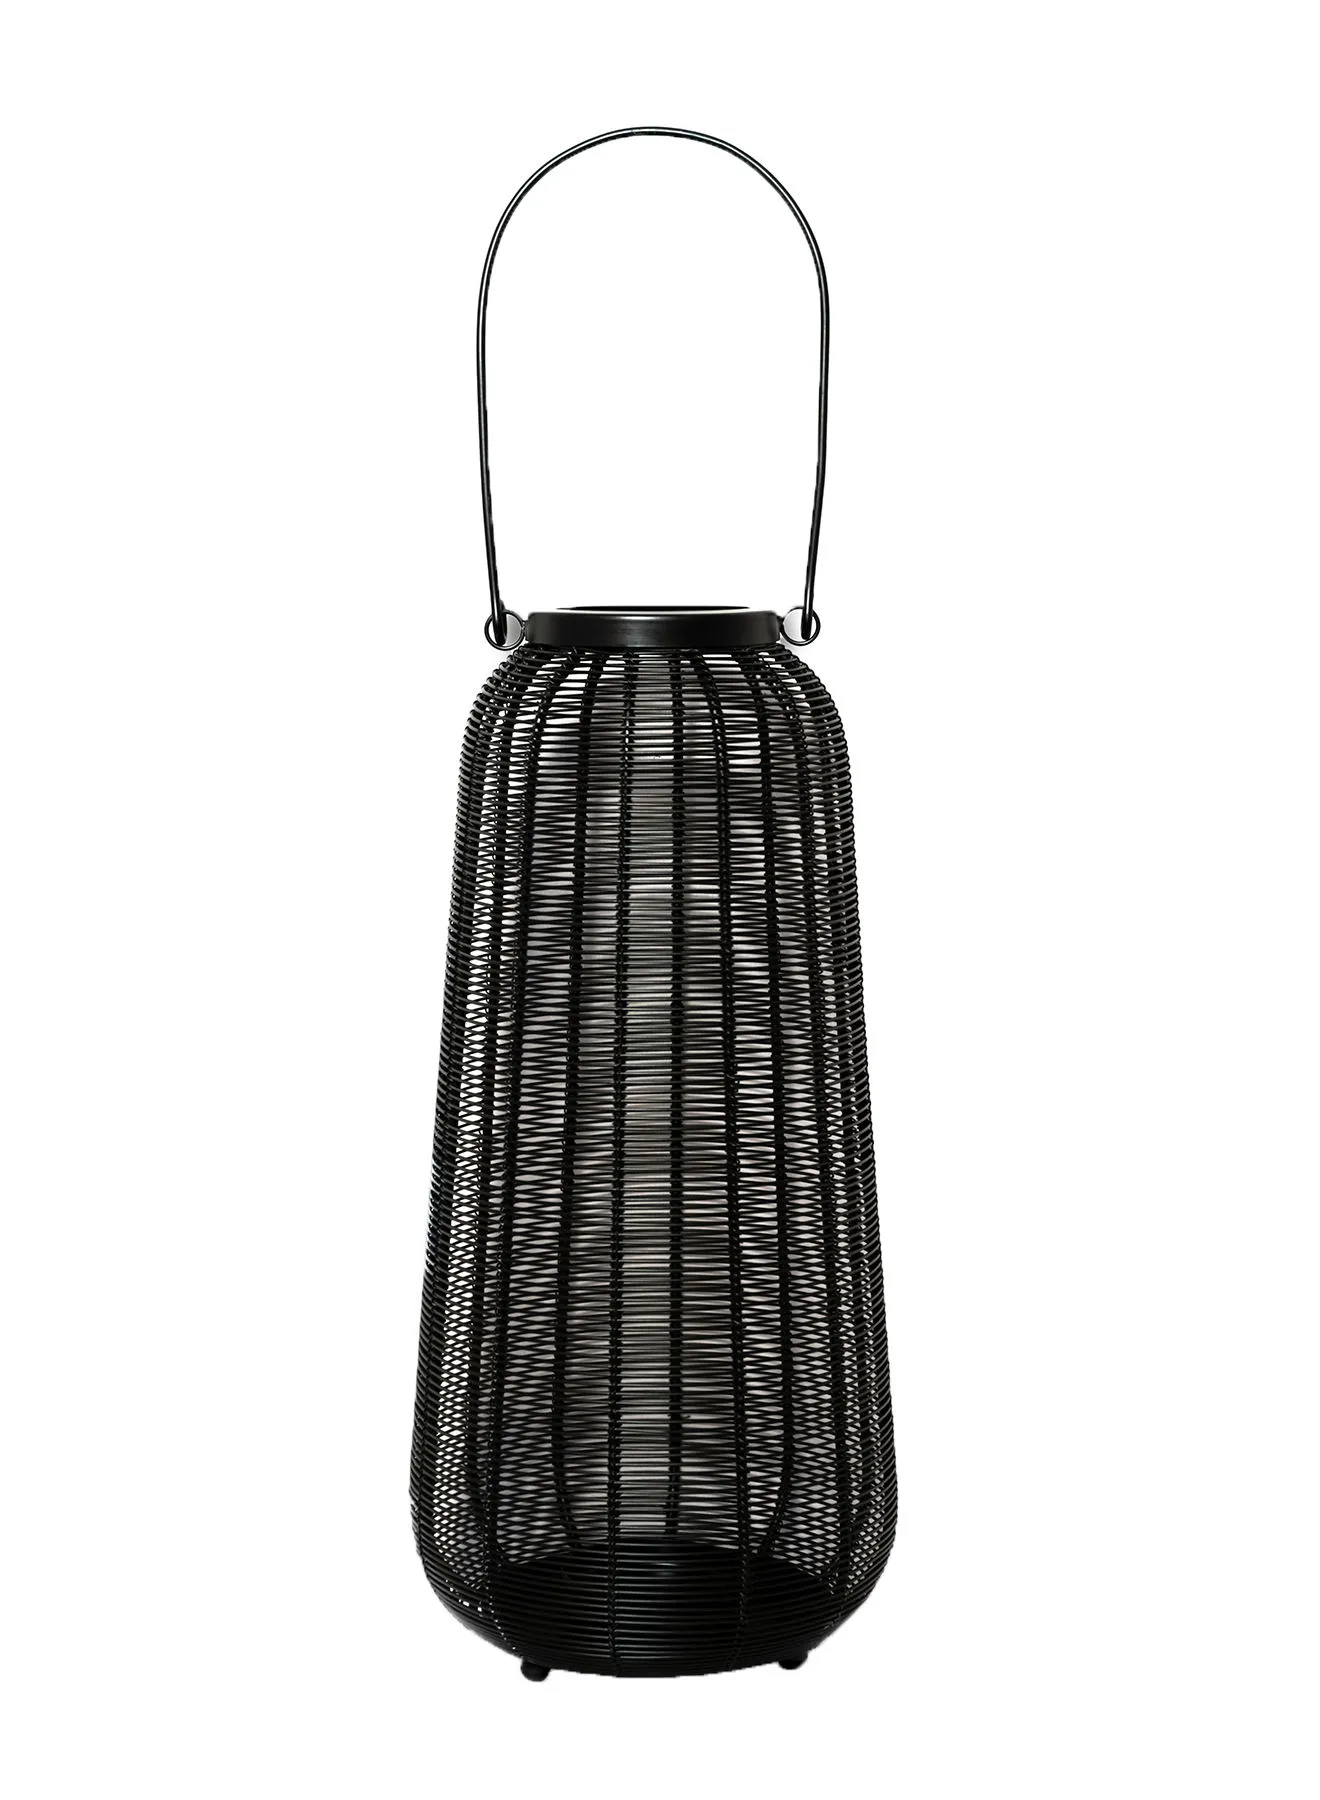 ebb & flow Handmade Durable Iron Candle Holder Lantern Unique Luxury Quality Scents For The Perfect Stylish Home Black 20.32 x 20.32 x 40centimeter